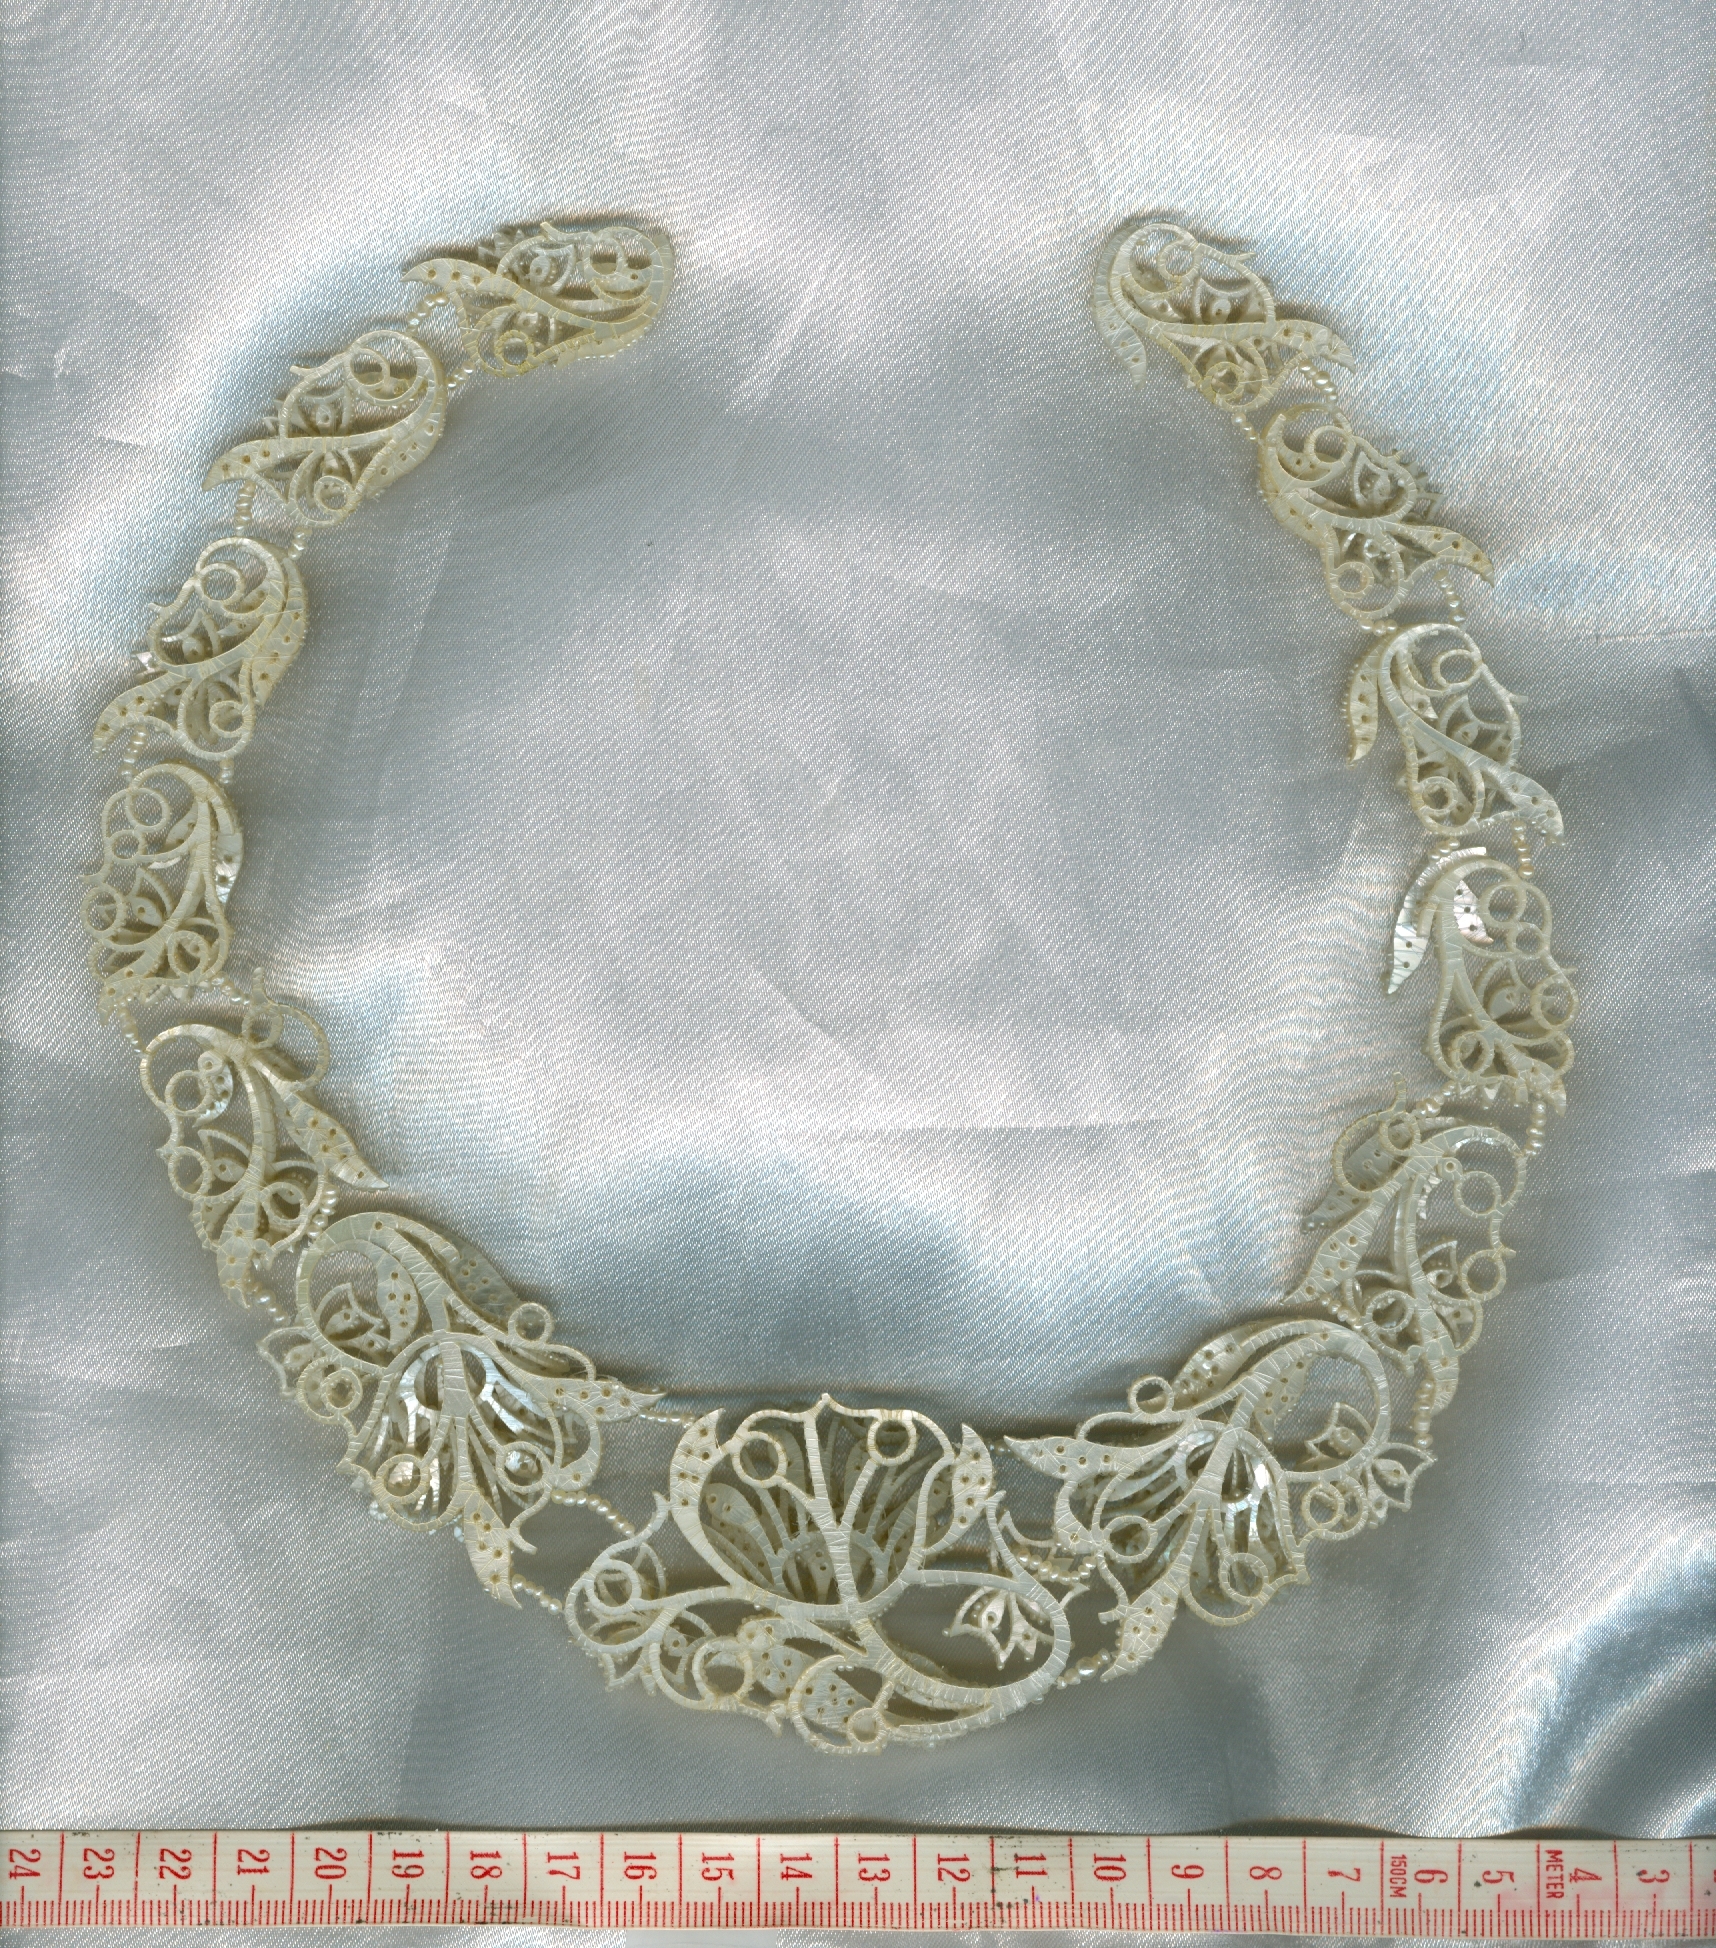 Georgian woven natural seed pearl parure necklace pendant brooches pre Victorian (image 49 of 50)